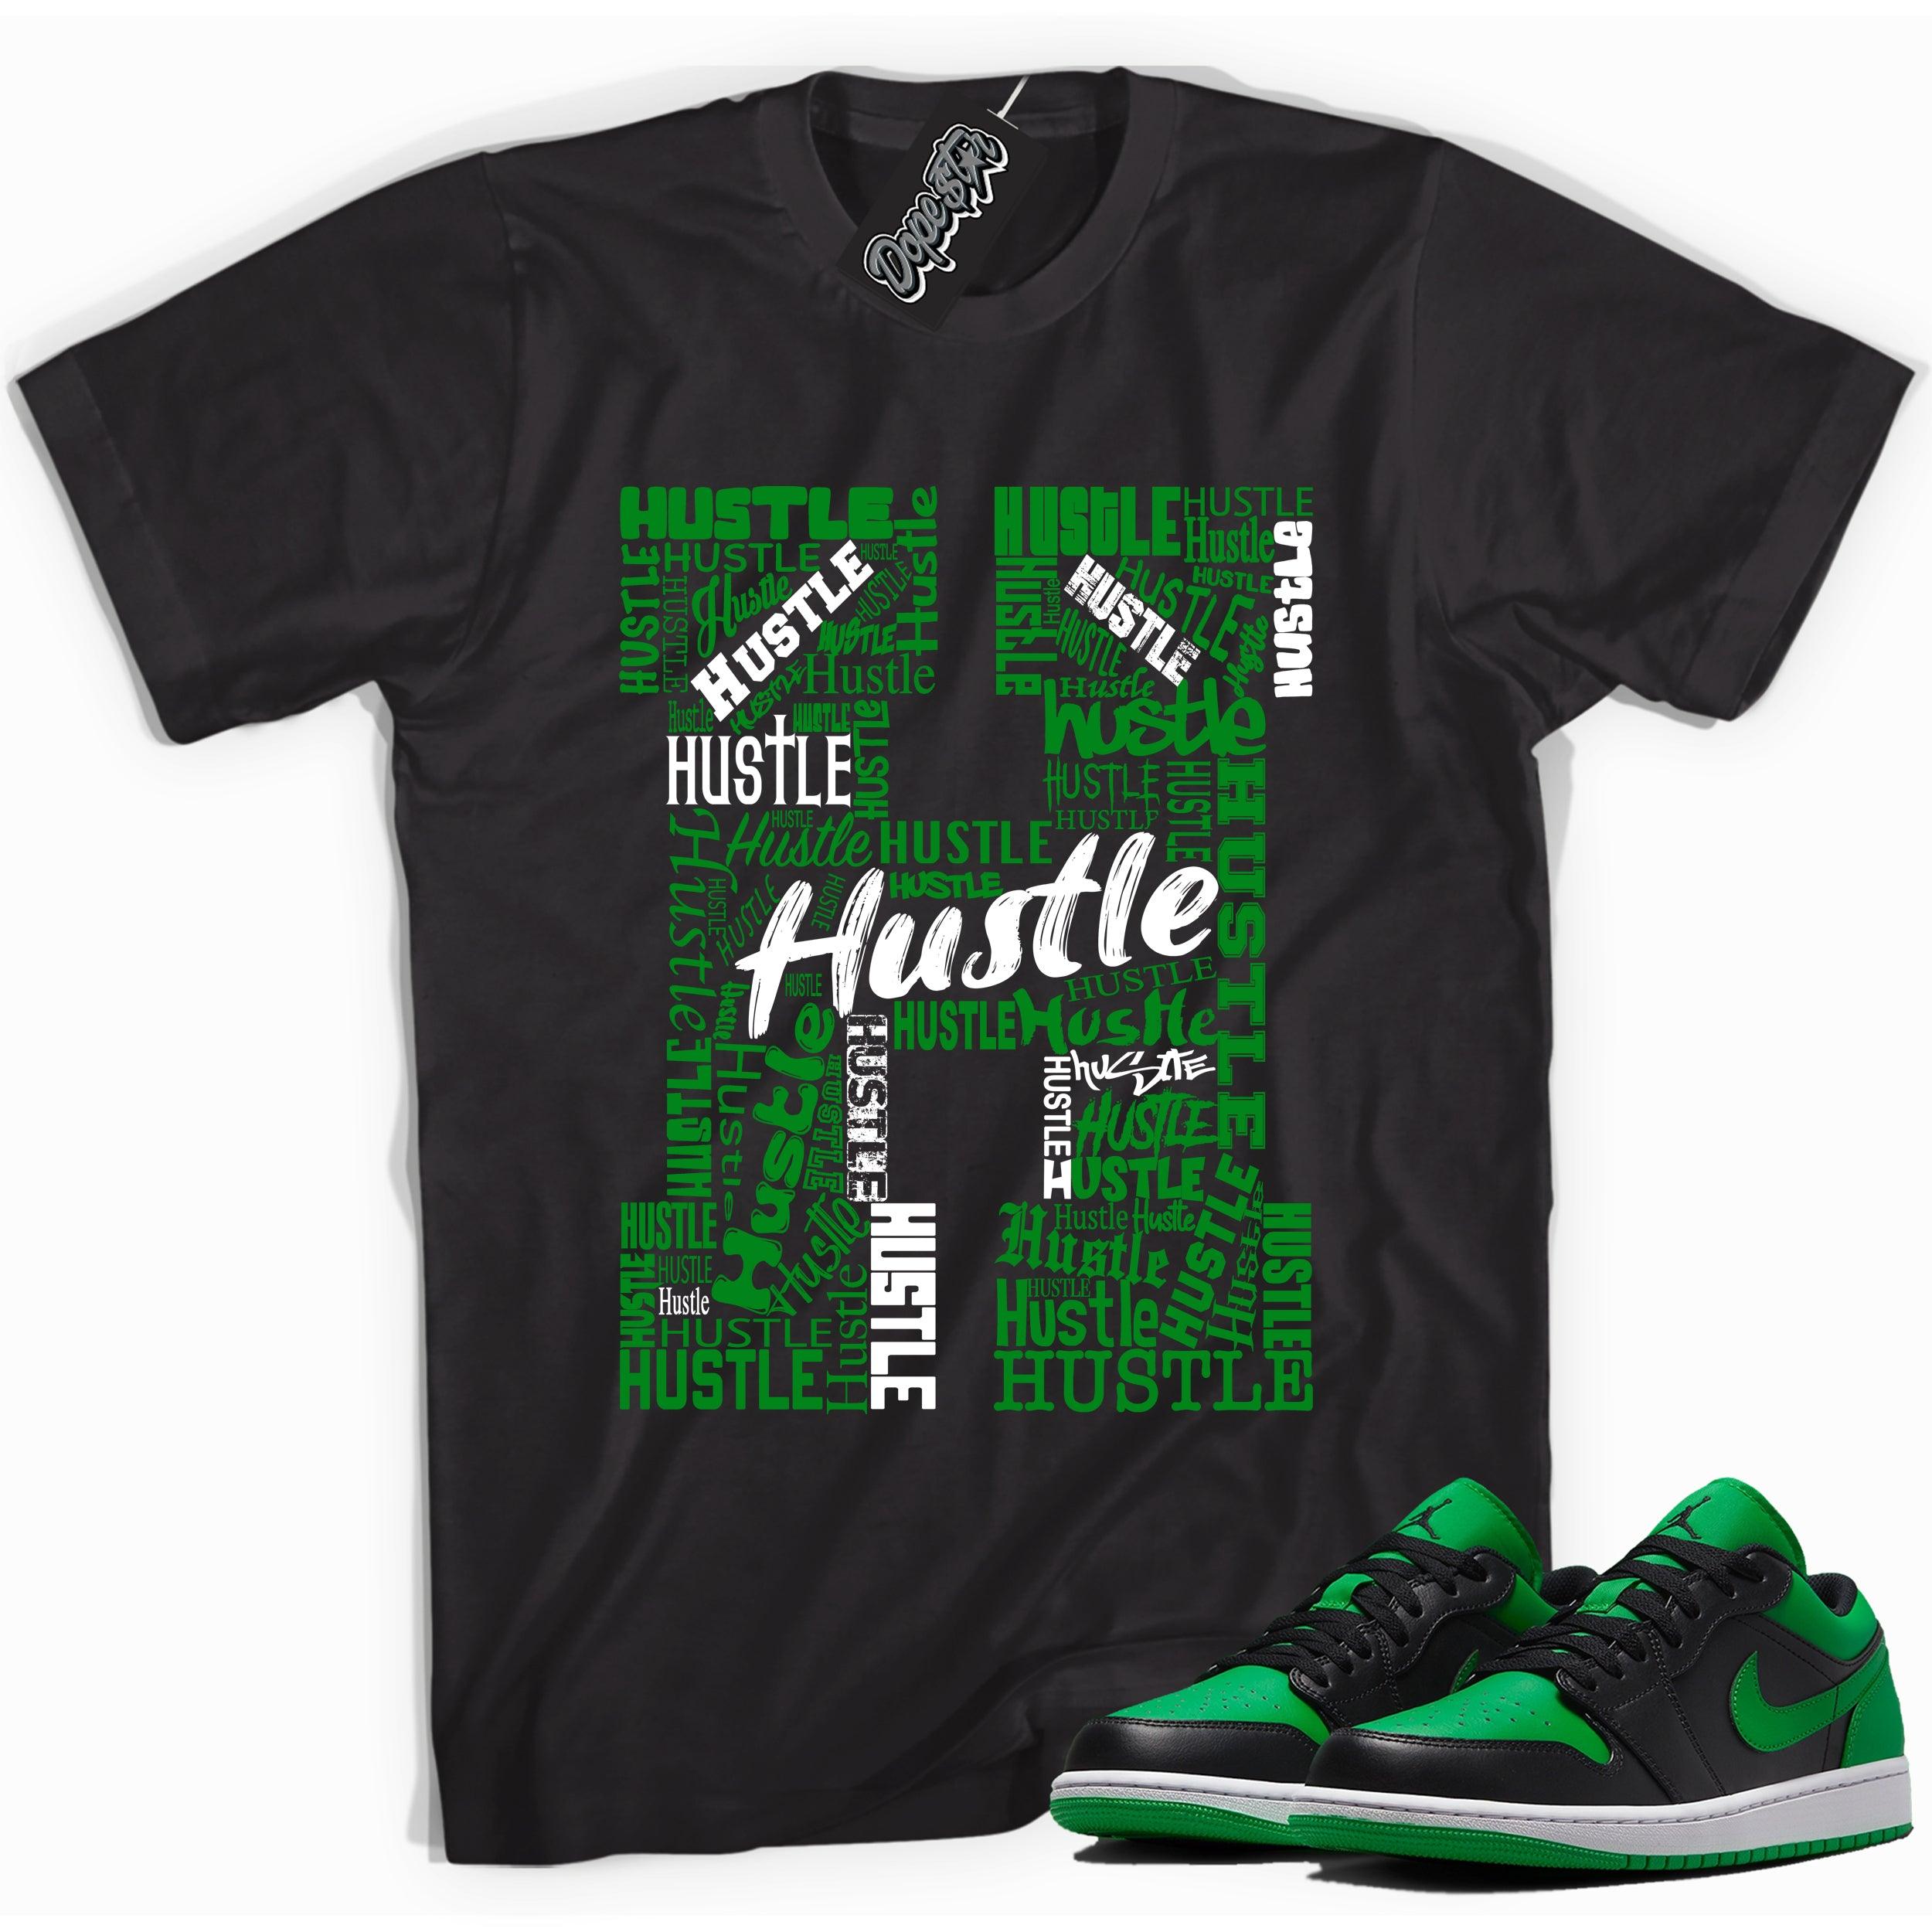 Cool black graphic tee with 'H For Hustle' print, that perfectly matches Air Jordan 1 Low Lucky Green sneakers